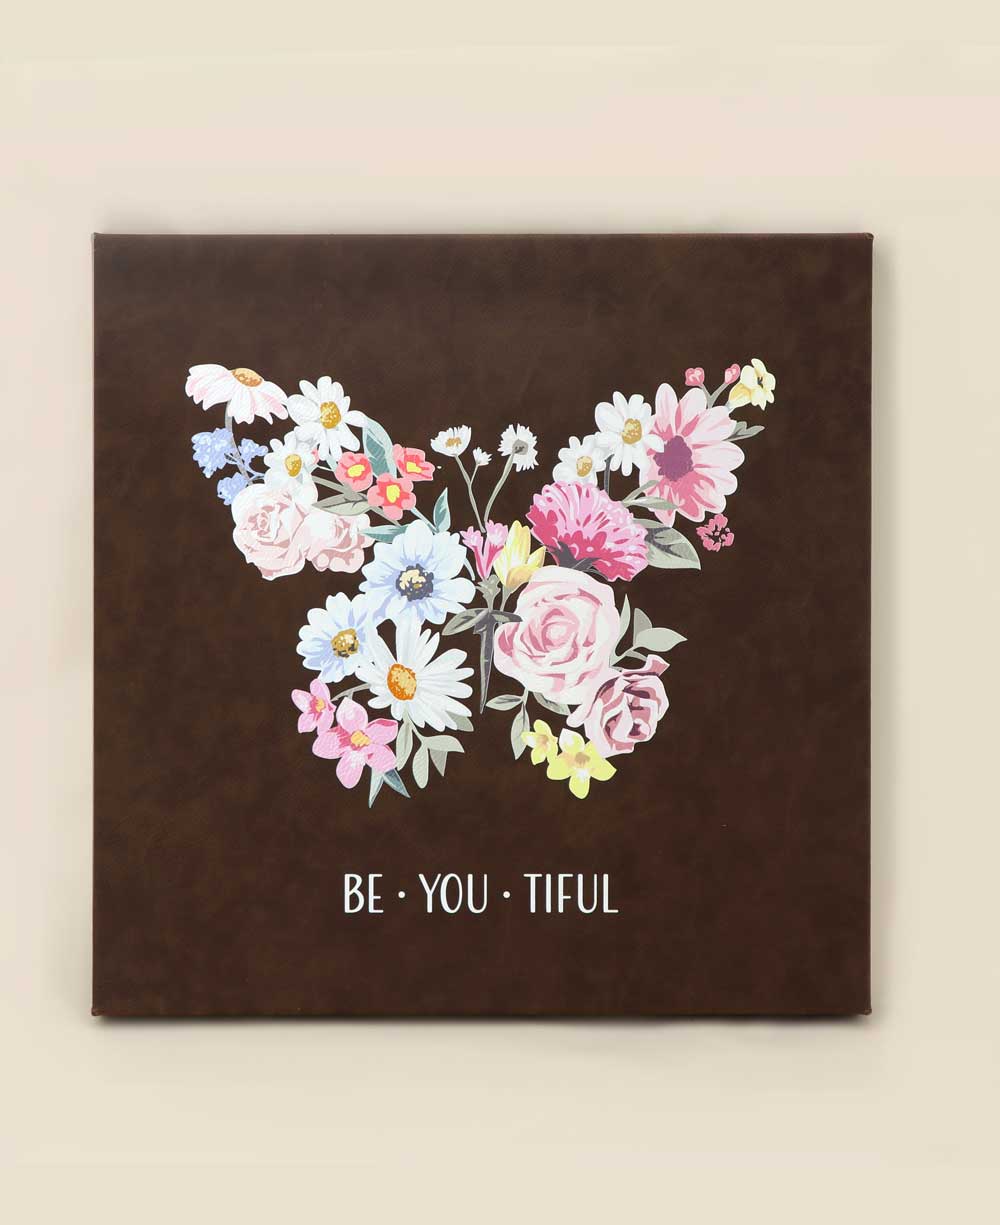 BeYouTiful Inspirational Art Floral Butterfly Wall Hanging - Posters, Prints, & Visual Artwork Brown